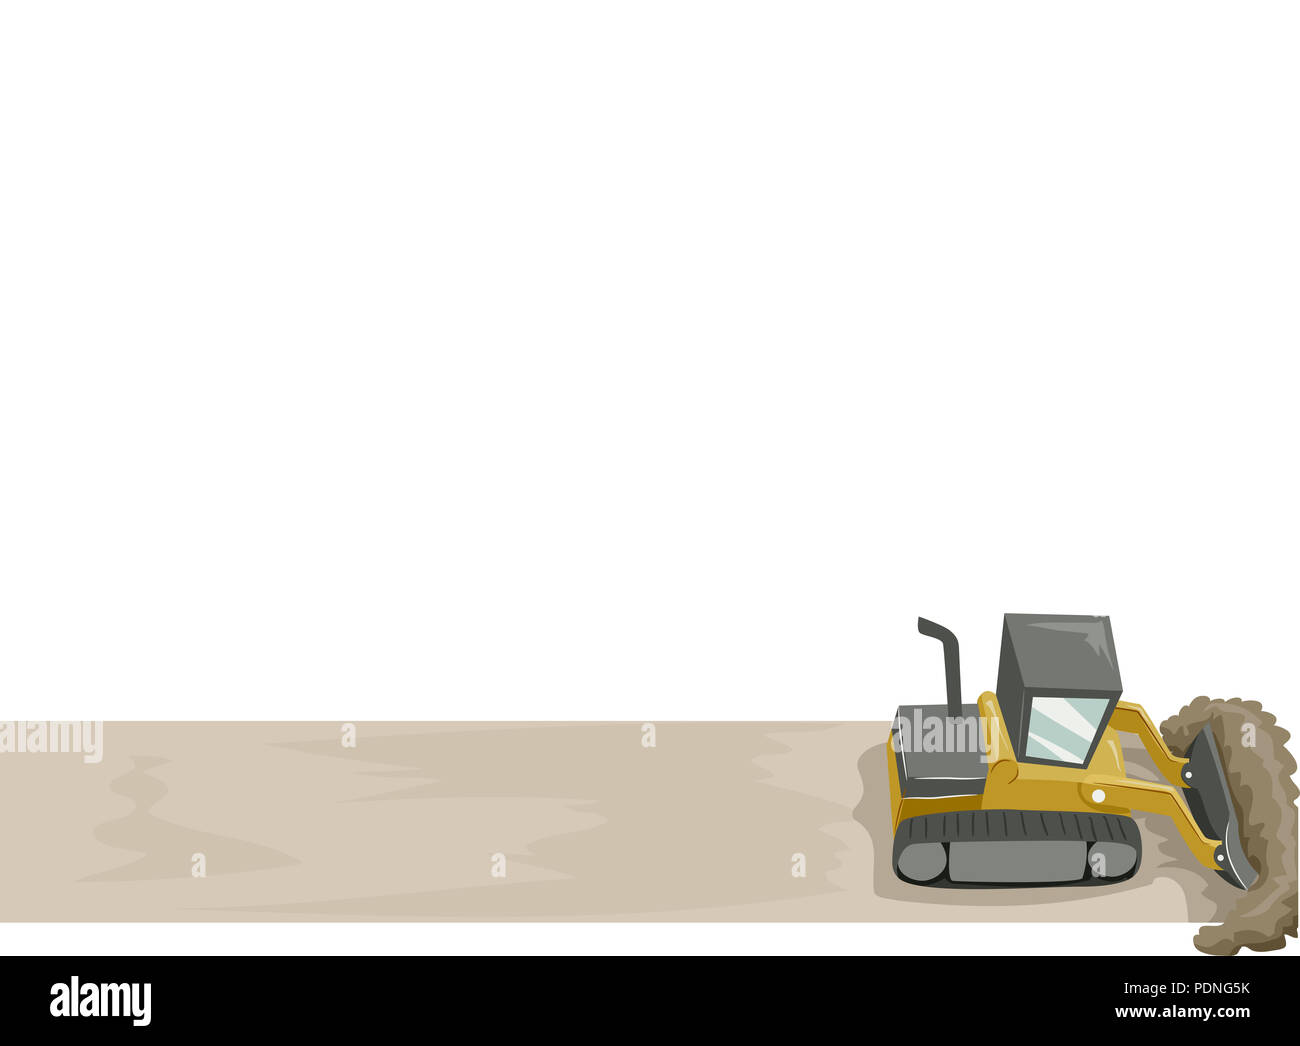 Illustration of a Bulldozer Clearing a Path Behind Stock Photo